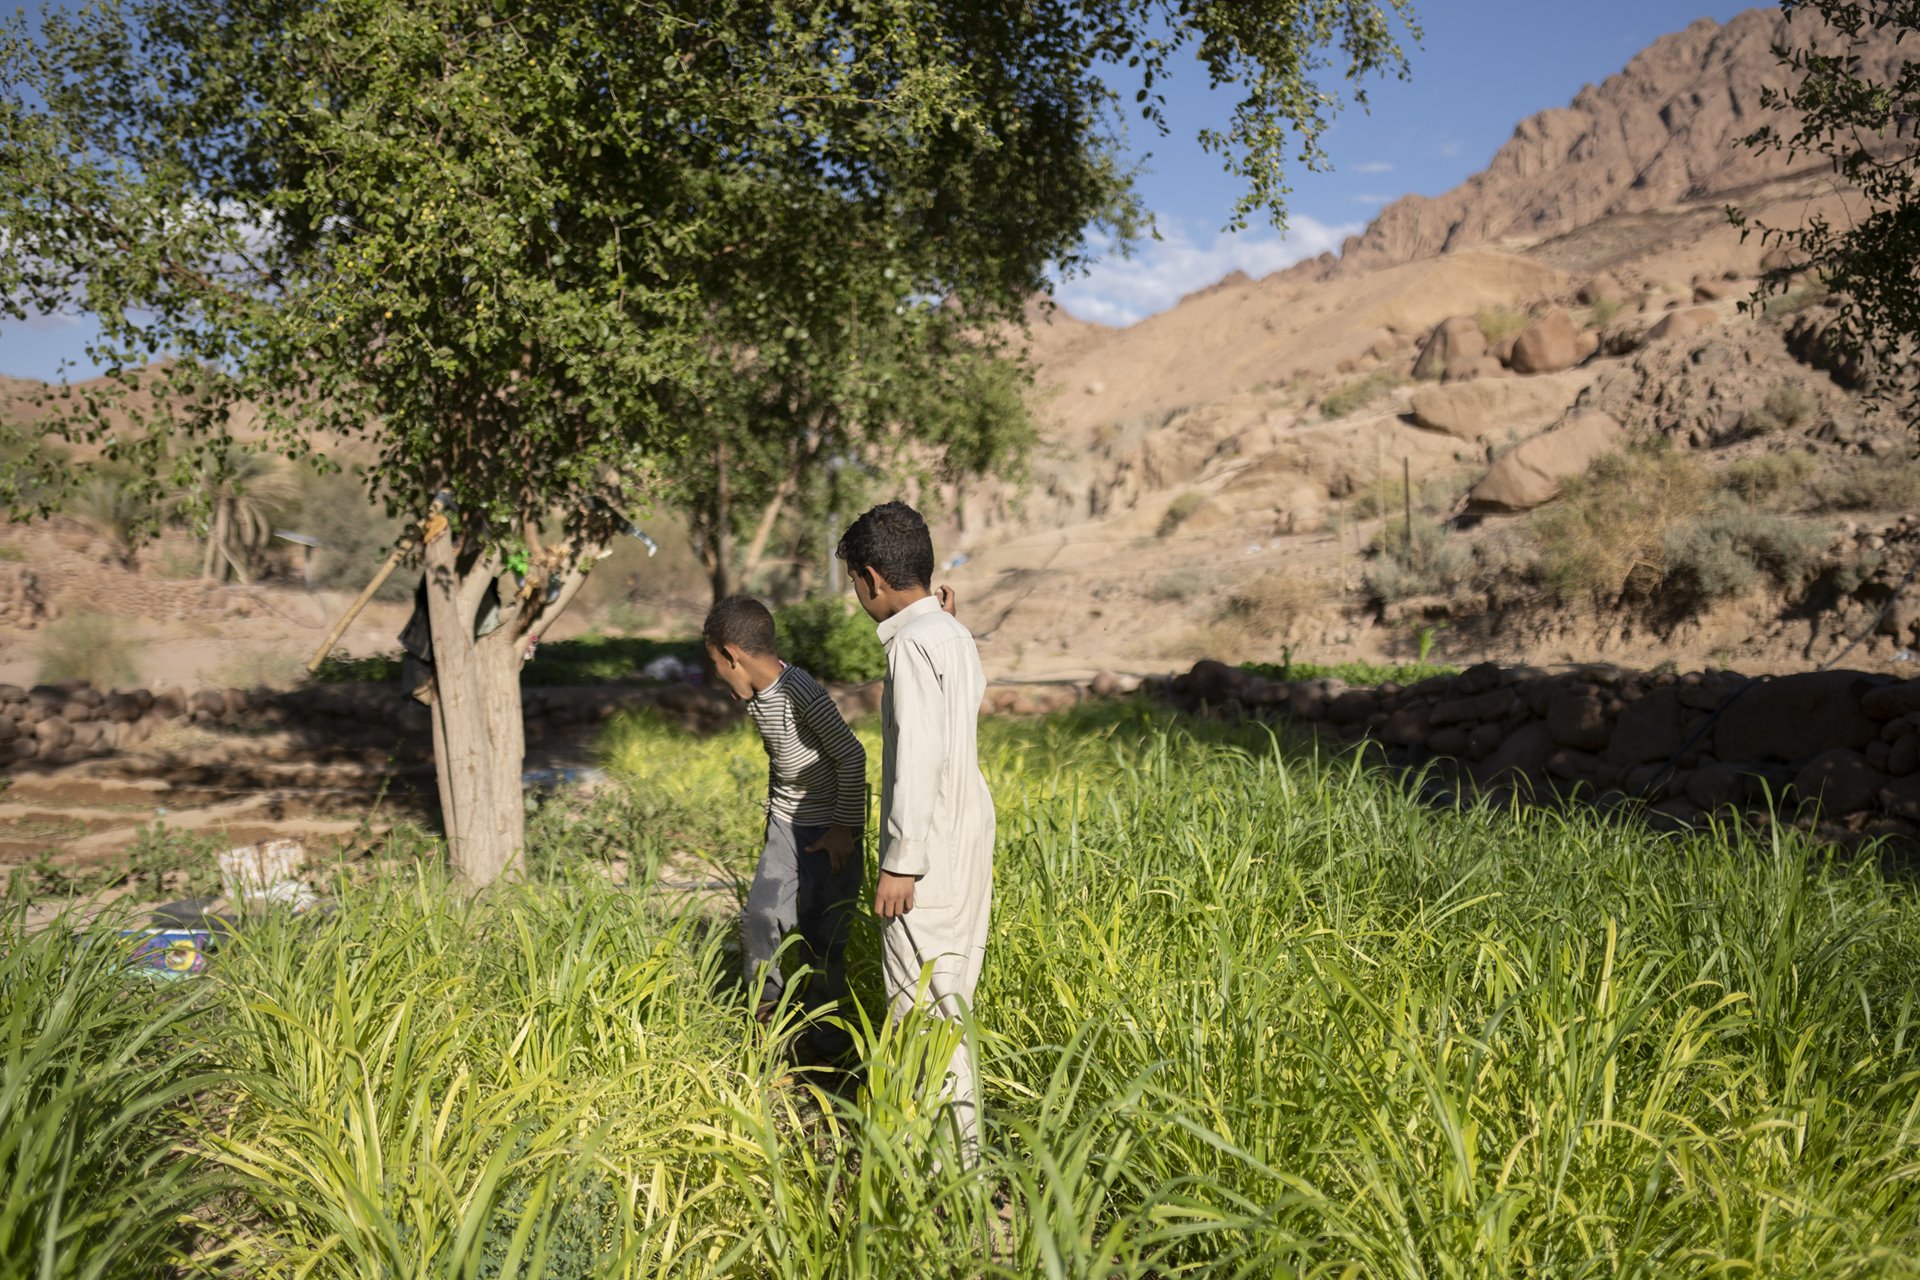 Youssef and Mohamed run around in their father&rsquo;s recently bloomed garden in St. Catherine, South Sinai, Egypt. South Sinai is prone to flash flooding and allows gardens like this one to flourish.